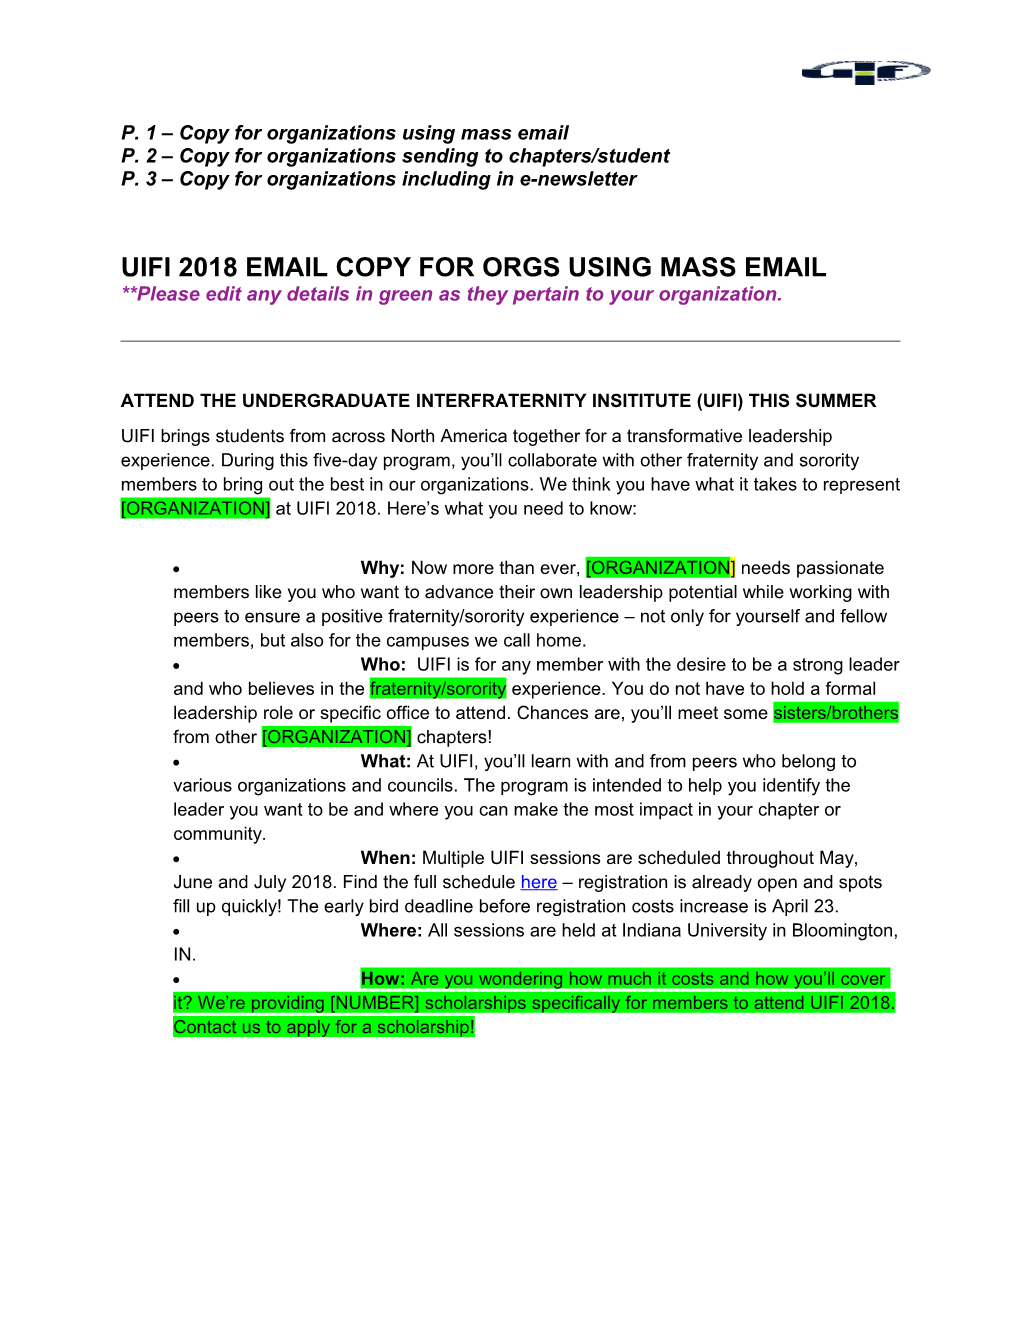 P. 1 Copy for Organizations Using Mass Email